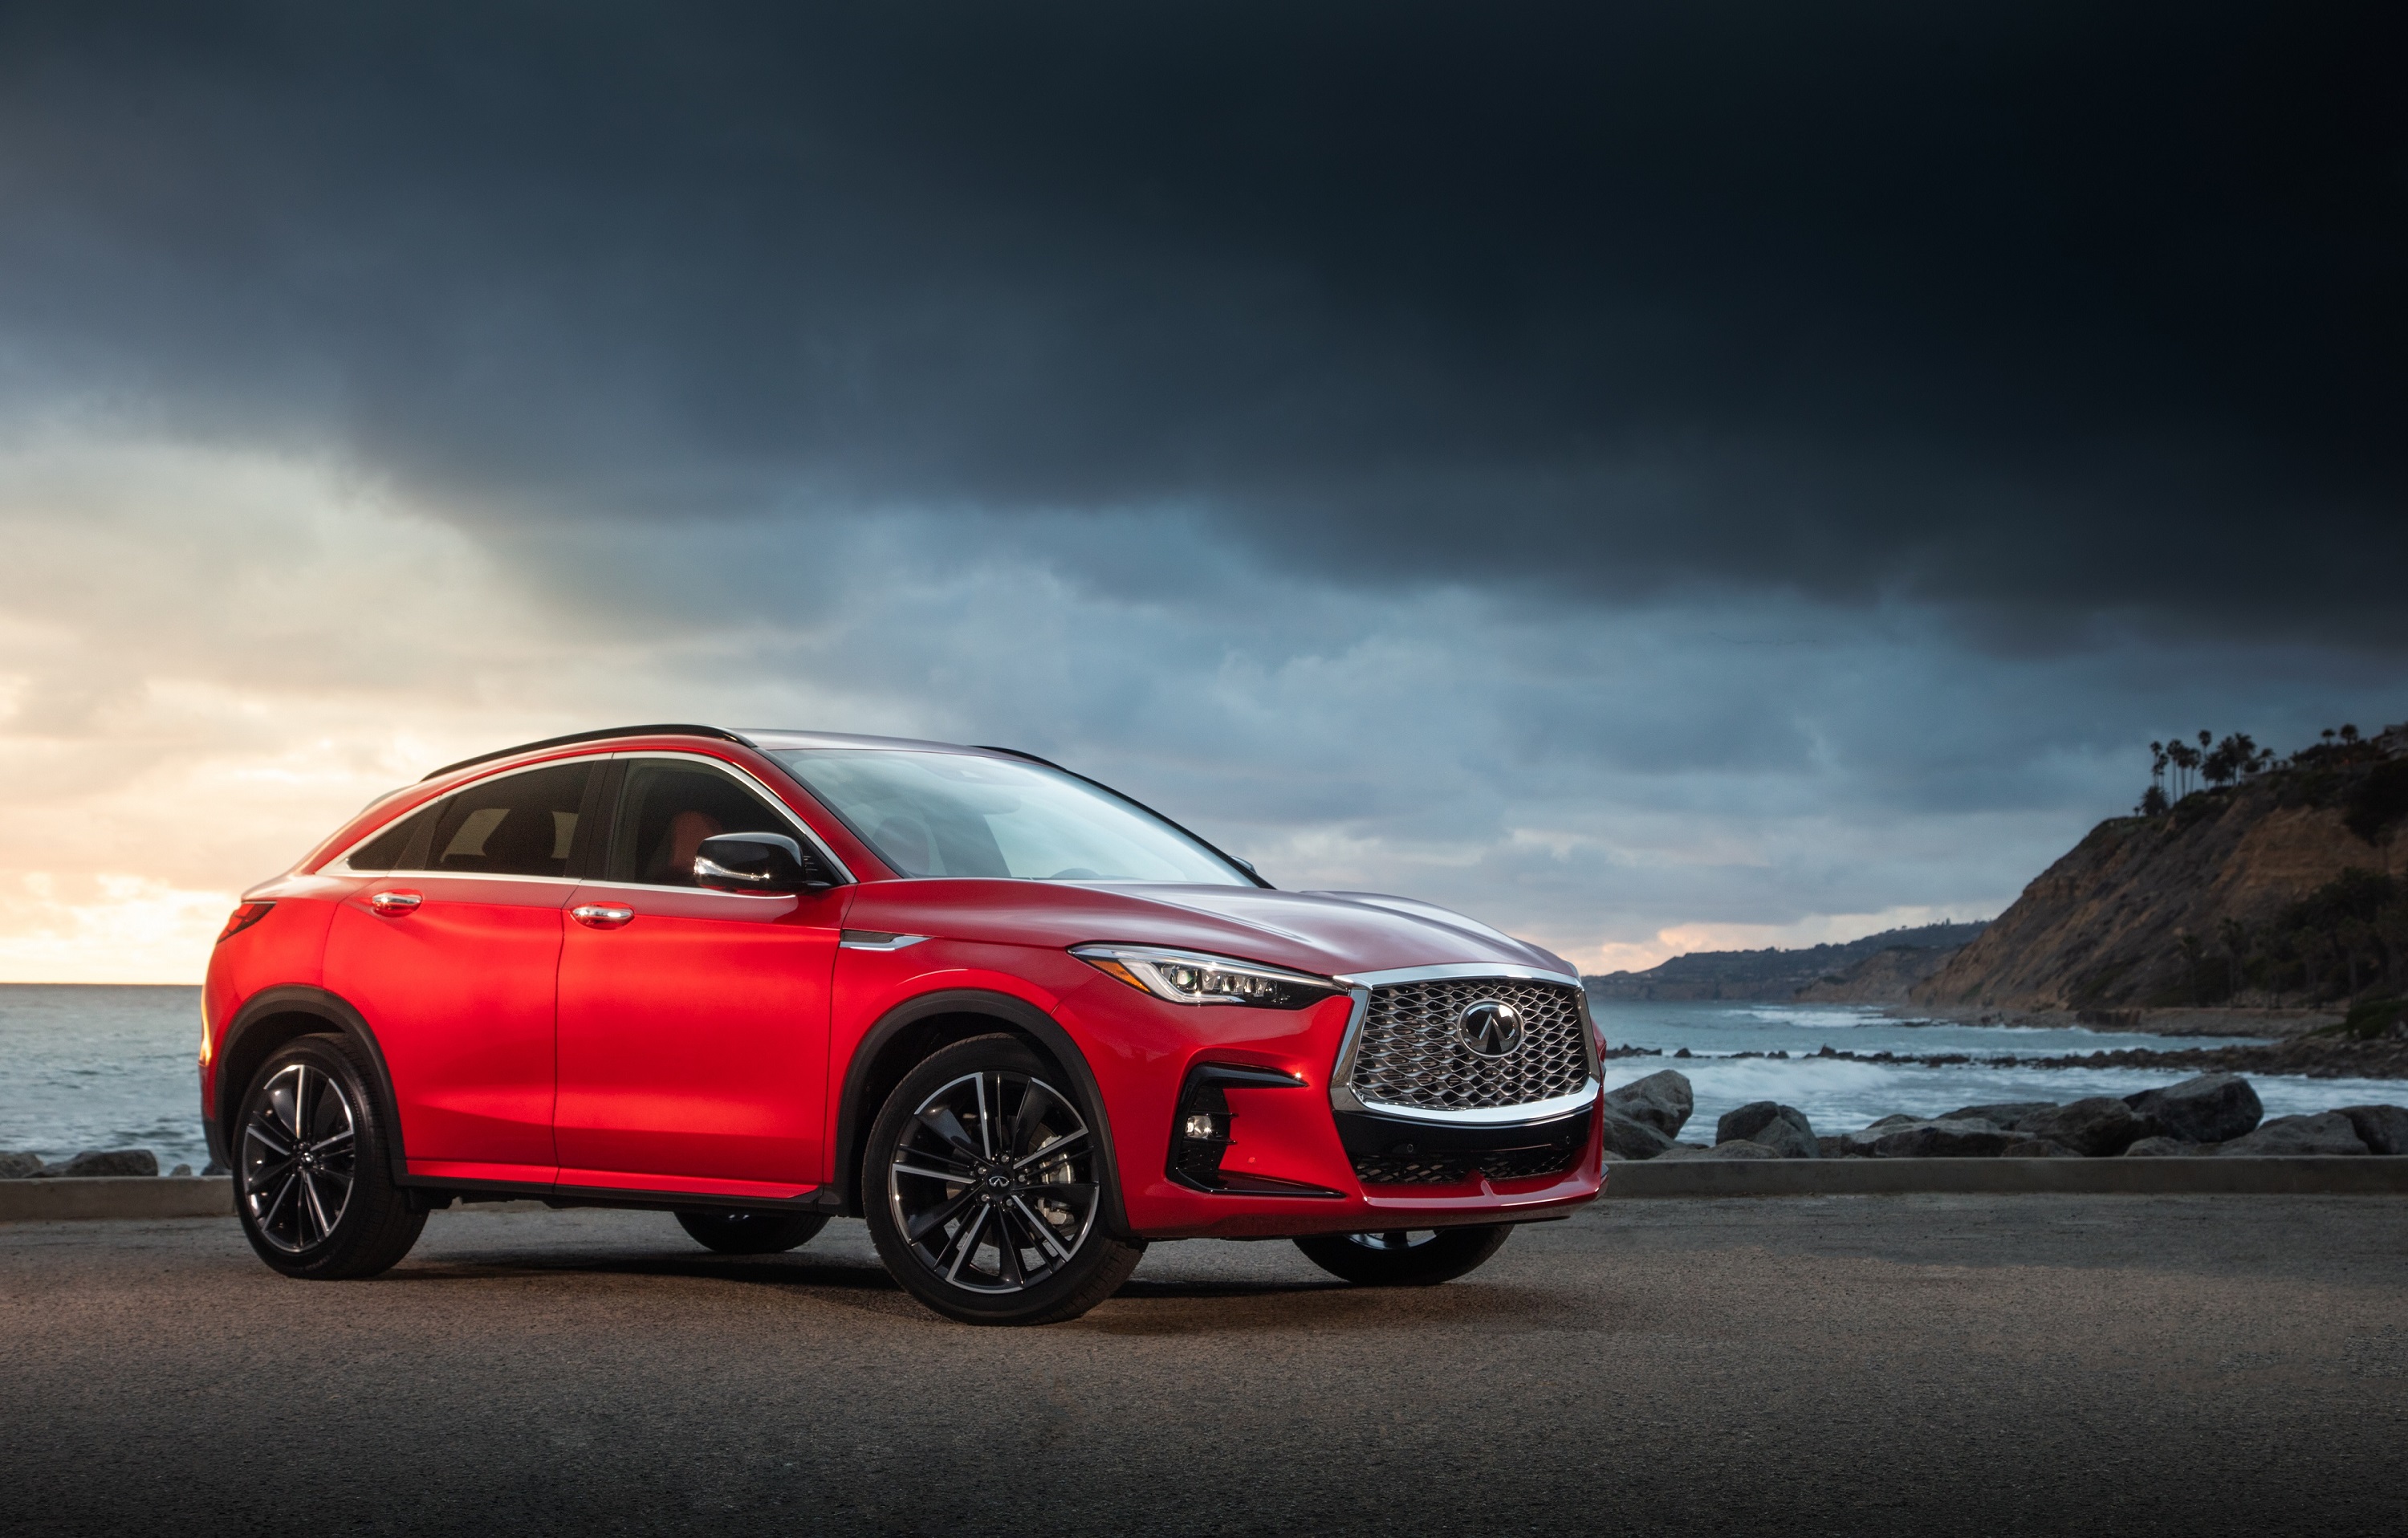 All-new 2022 INFINITI QX55 primed for showtime with generous features at launch